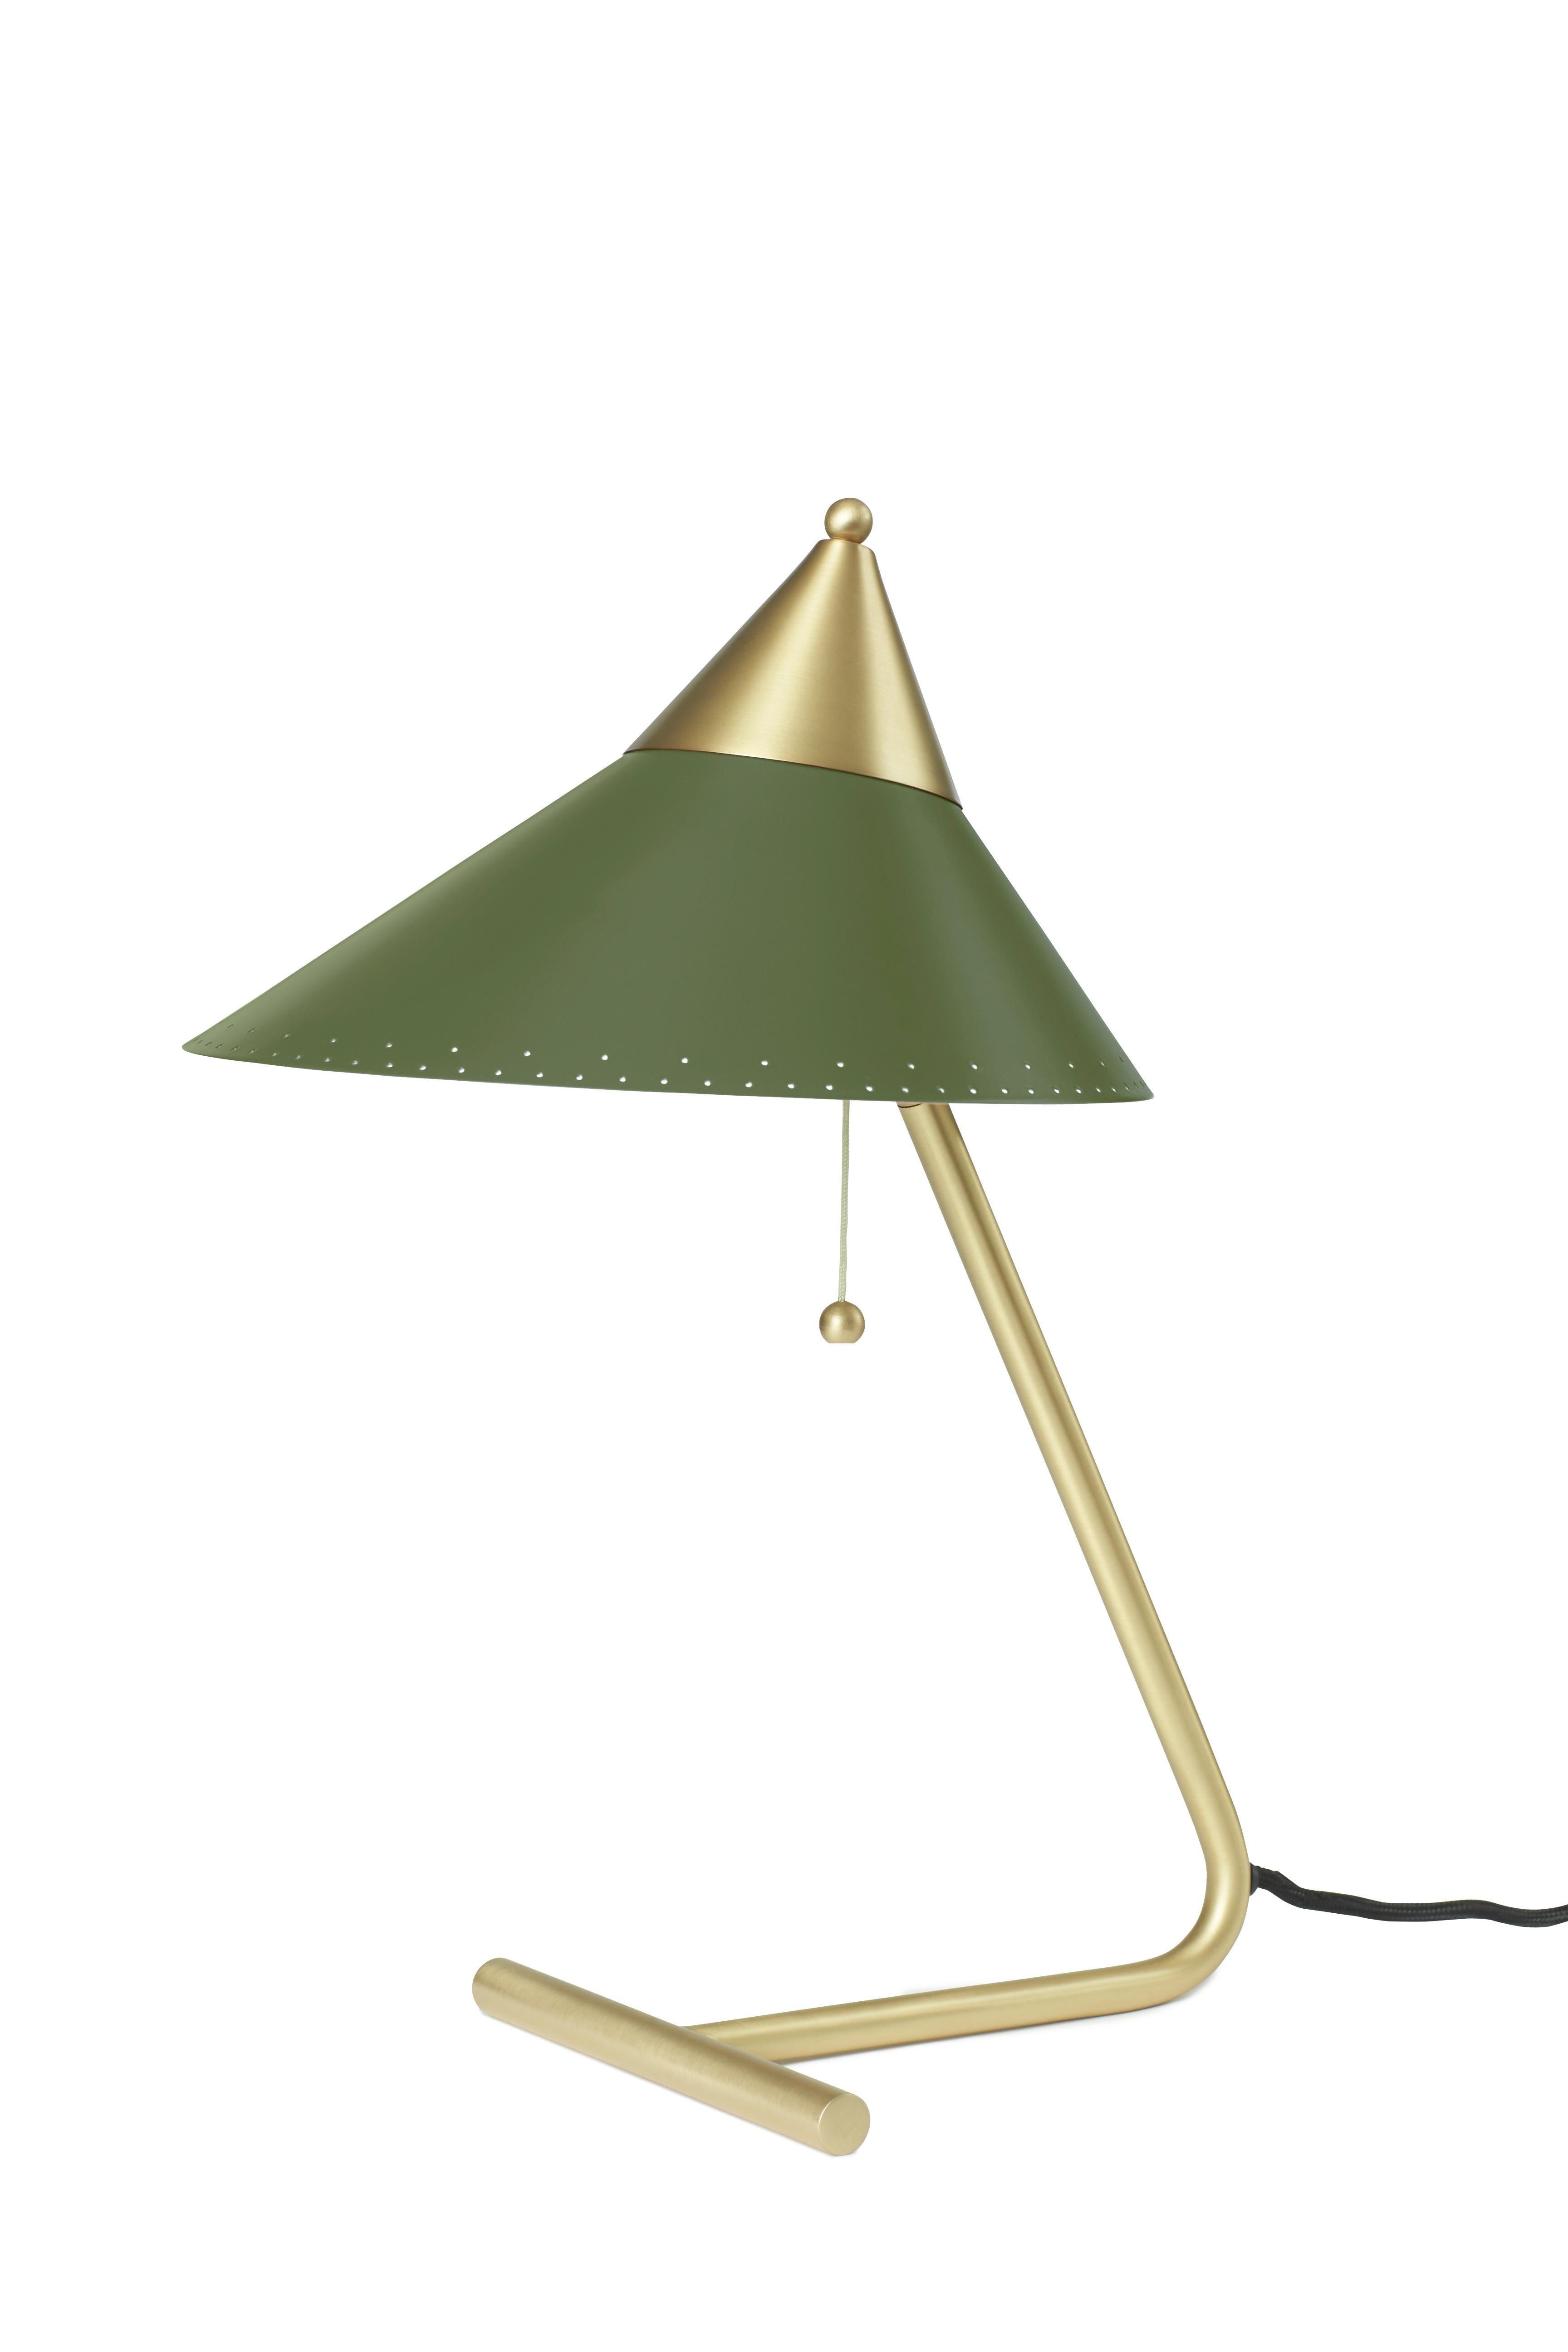 For Sale: Green (Pine Green) Brass Top Table Lamp, by Svend Aage Holm Sorensen from Warm Nordic